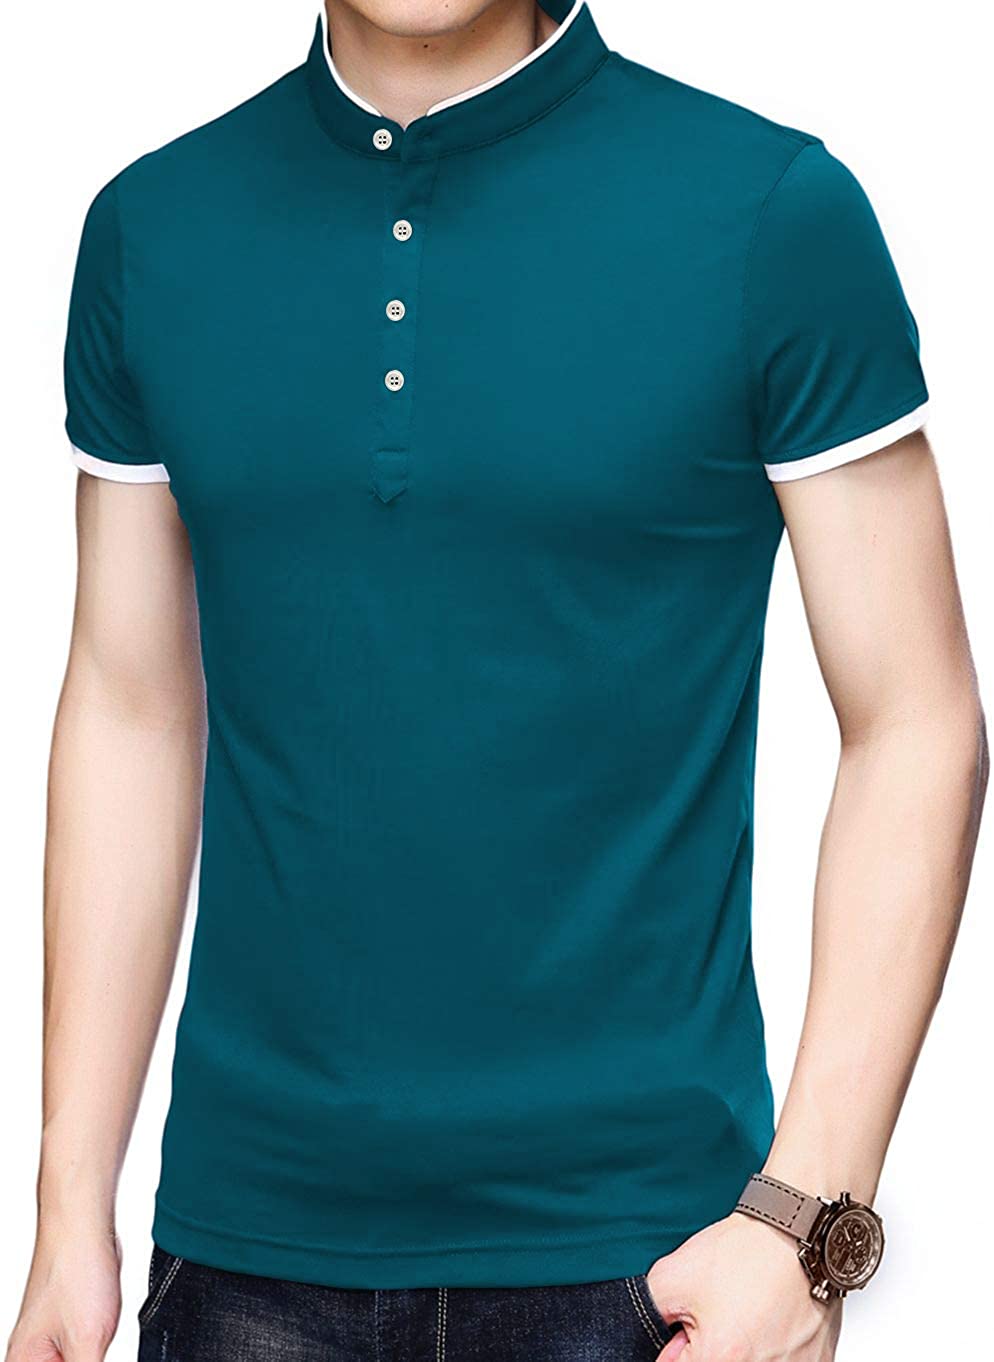 YTD Mens Summer Slim Fit Pure Color Short Sleeve Polo Casual T-Shirts